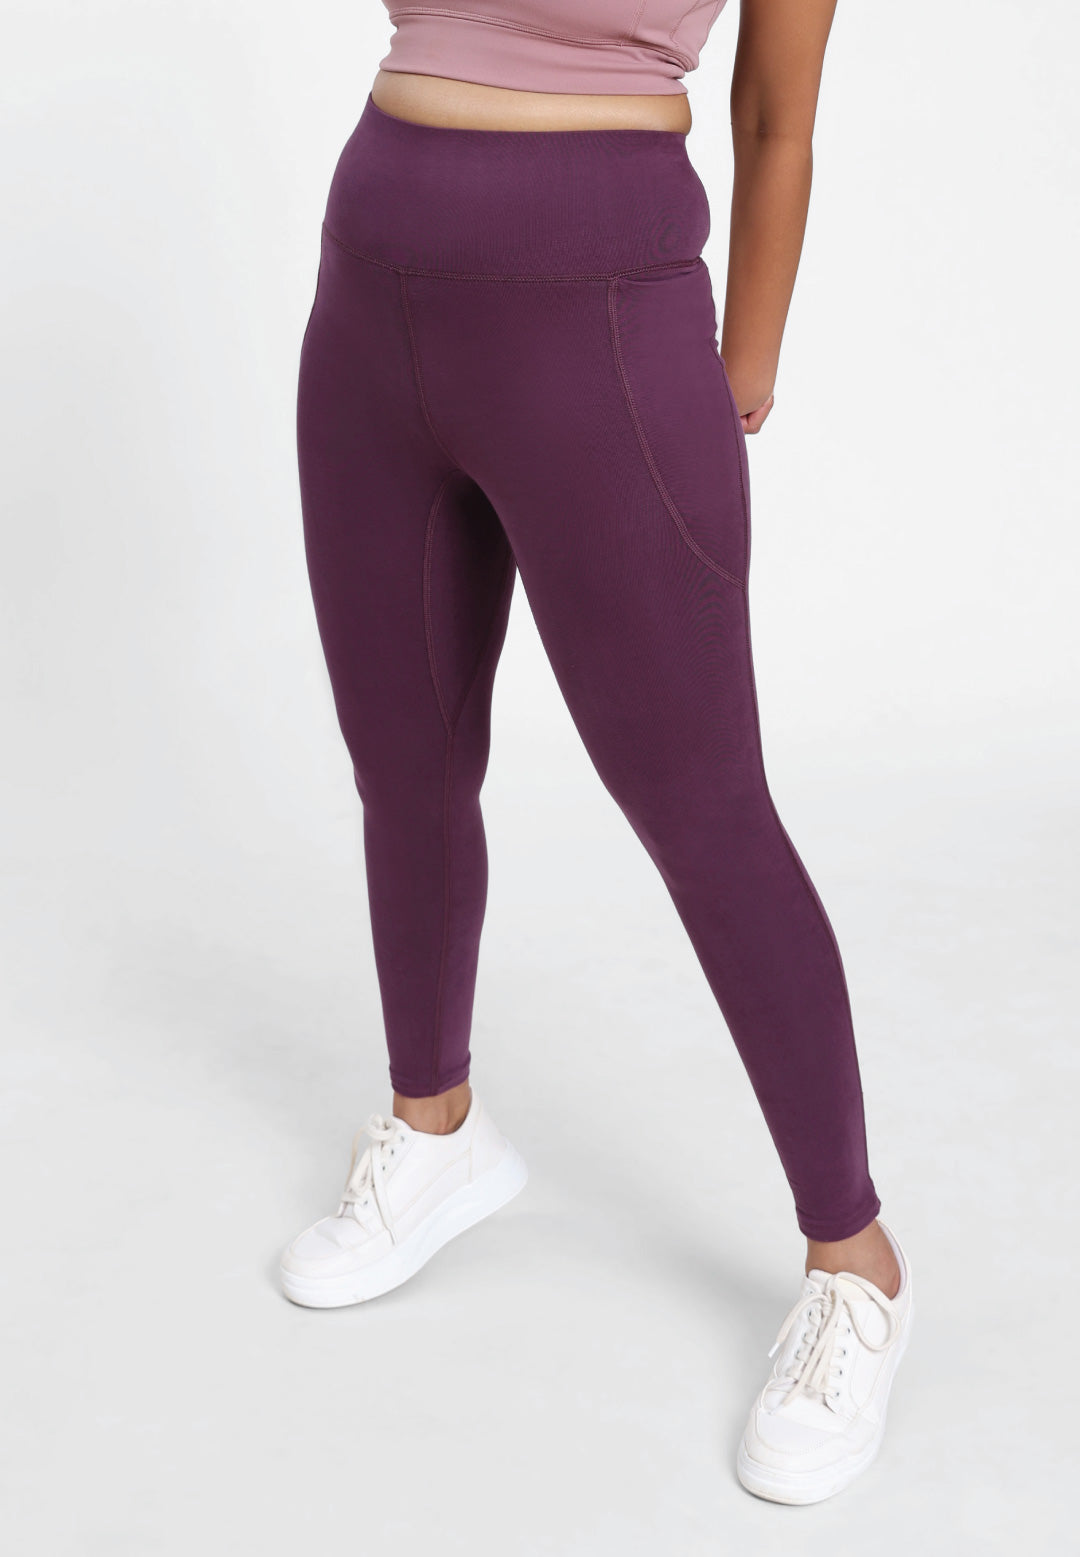 11 purple leggings and colors to wear - Find A Way by JWP